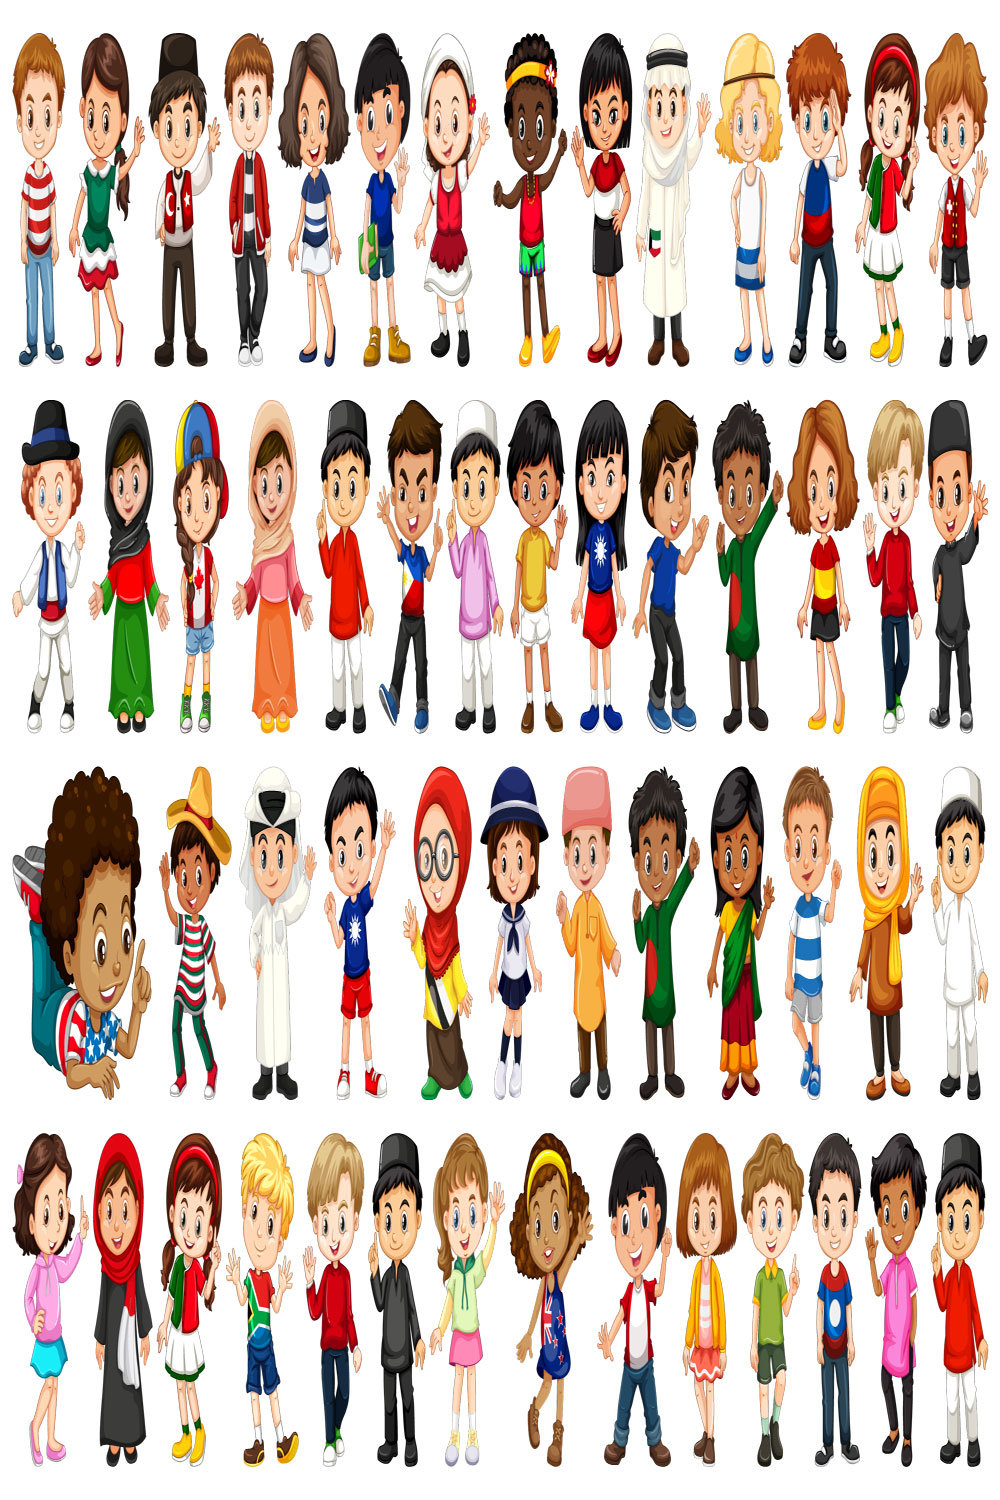 Large set ethnical people pinterest preview image.